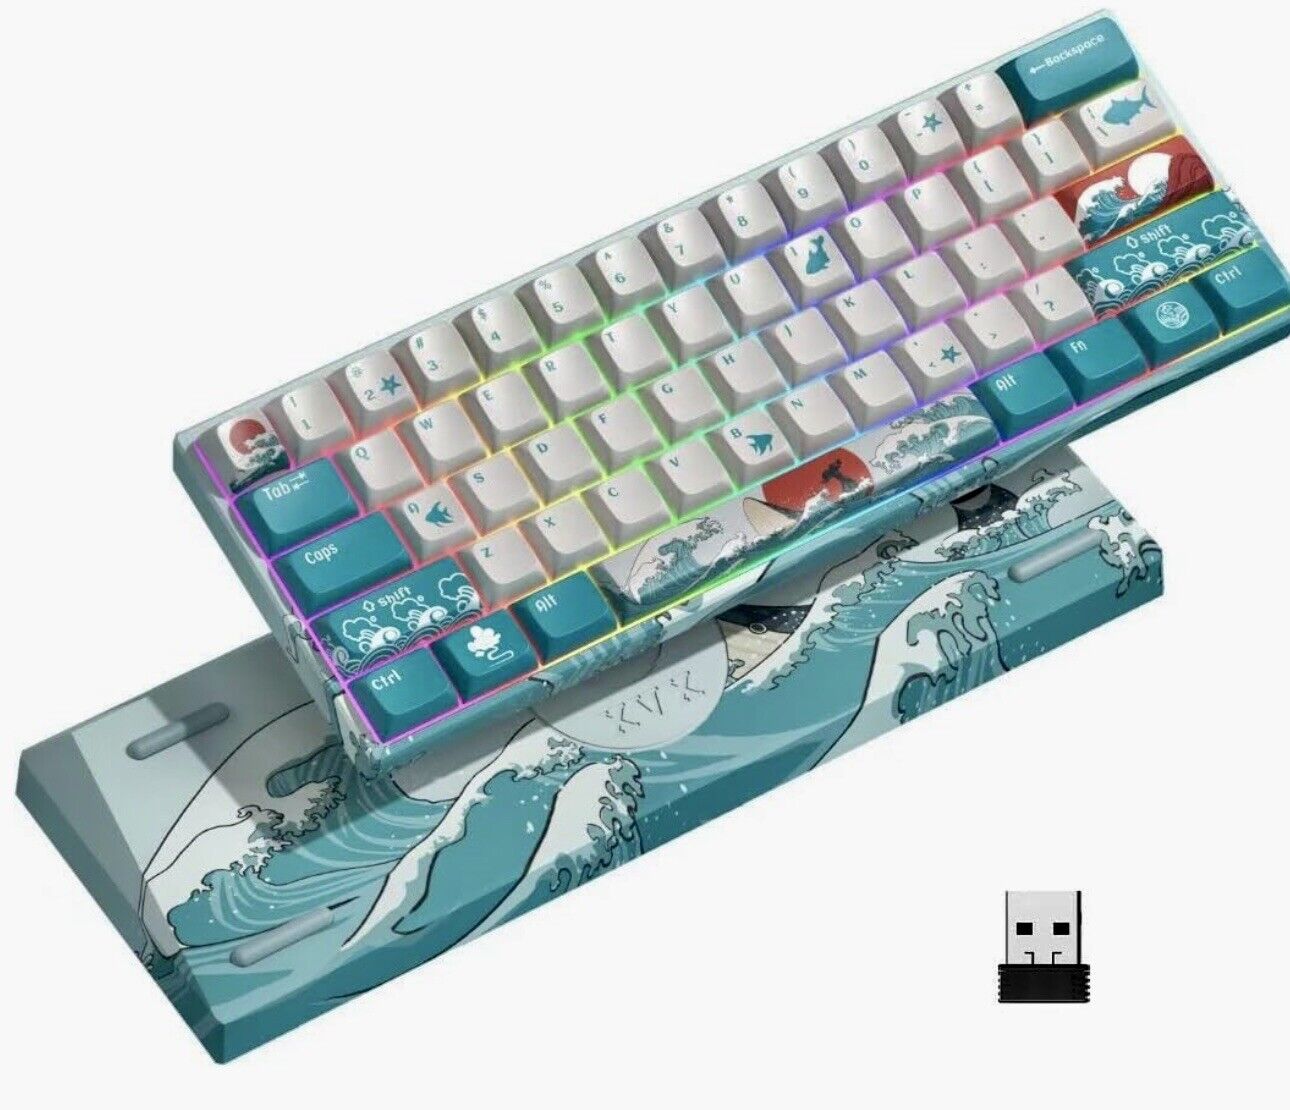 XVX M61 High Performance 60% Mechanical Gaming Keyboard /Coral Sea, Brown Switch